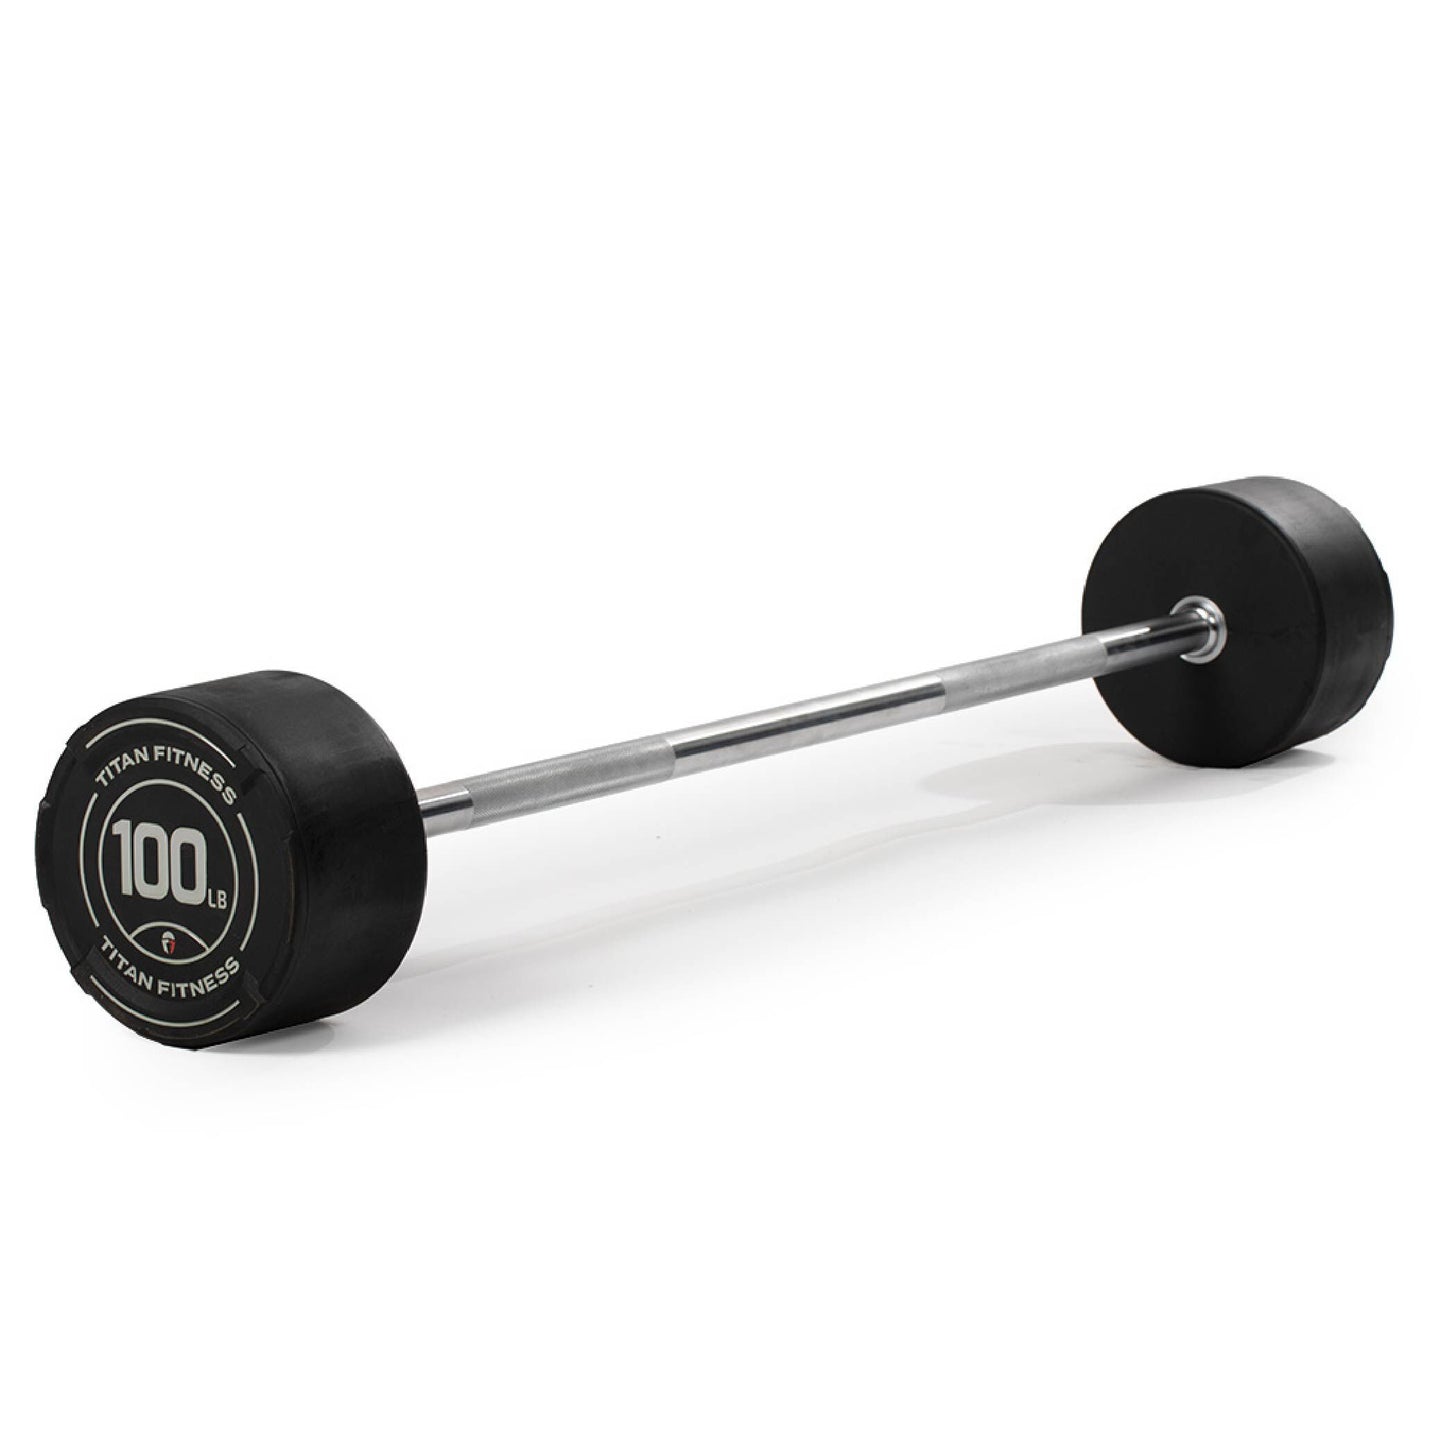 100 LB Straight Fixed Rubber Barbell - view 1